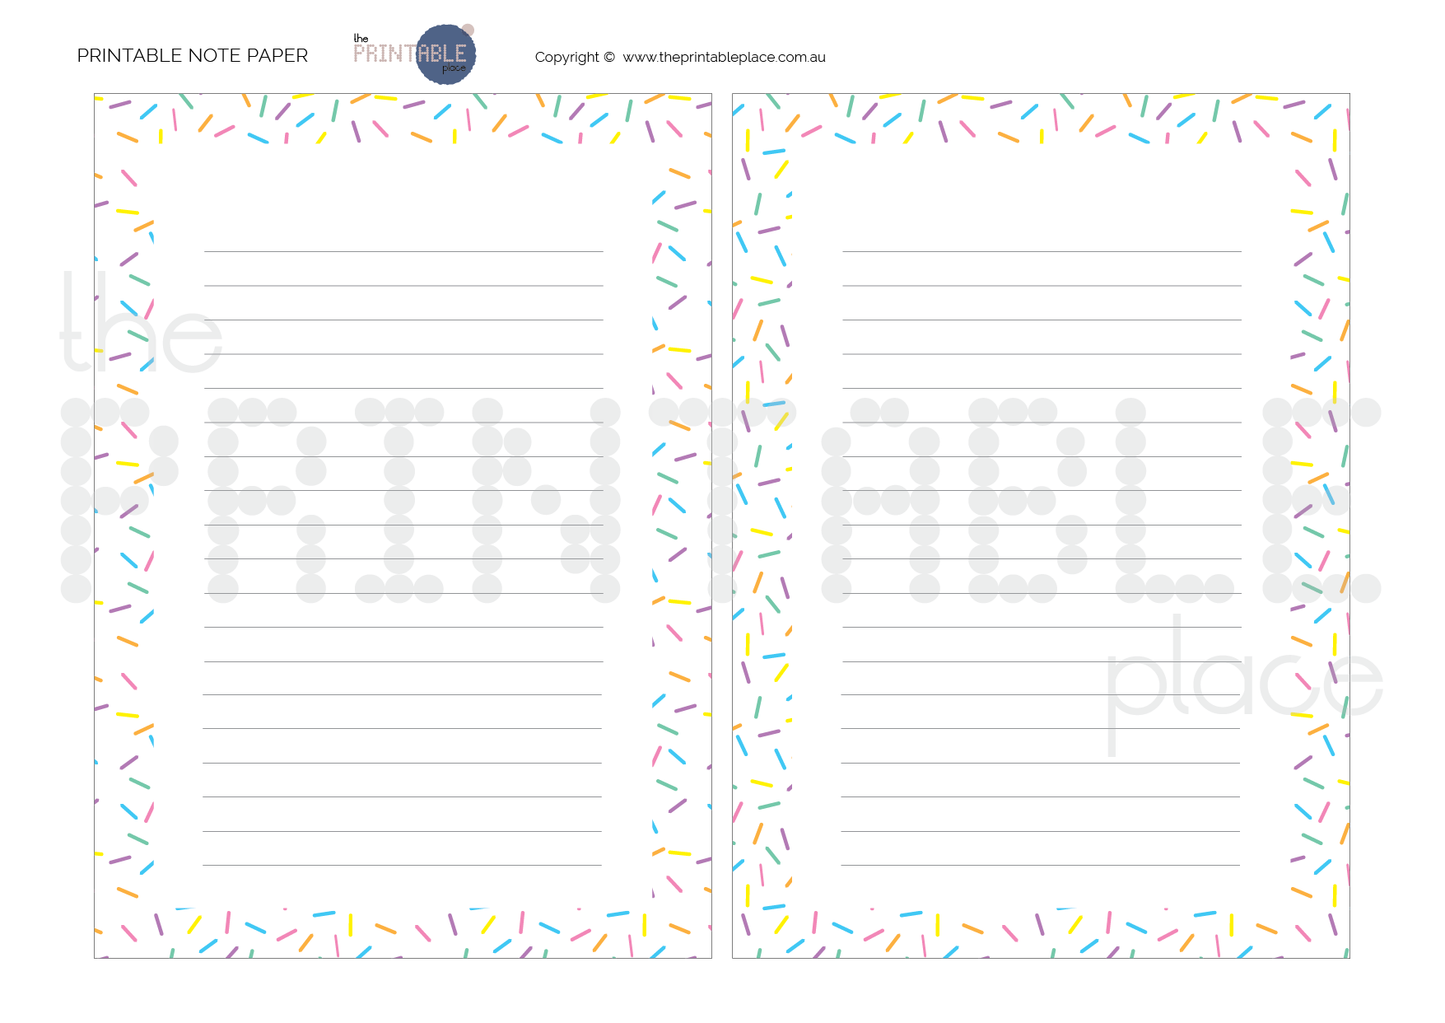 Sprinkles On Top Printable Note Paper-the-printable-place.myshopify.com-Note Paper